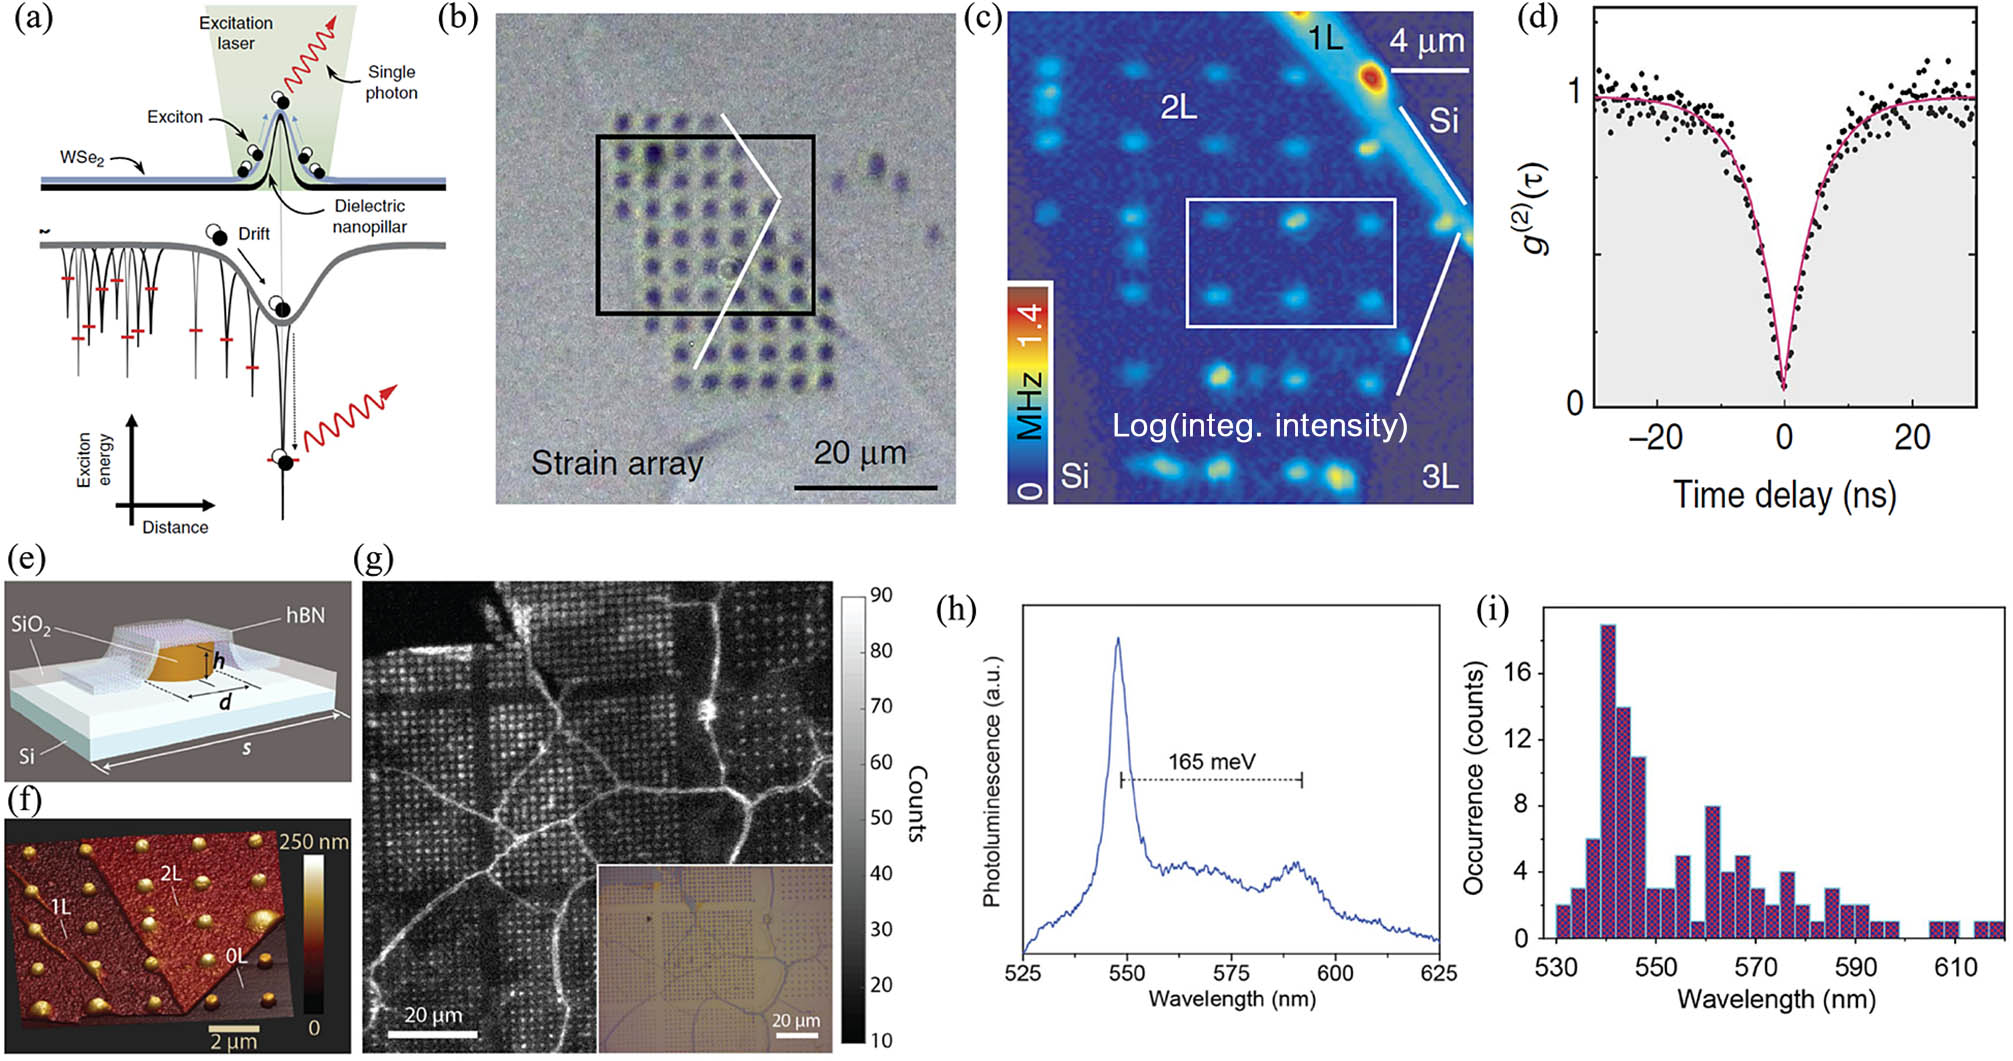 Deterministic activation single-photon emitters in 2D materials. (a) Mechanism illustration of the generation of single-photon emitters in WSe2 by induced strain[65]. (b) Optical micrograph of bi-layer WSe2 after the transfer onto the nanopillars[65]. (c) A 2D spatial map of the PL integrated intensity within 700–860 nm[65]. (d) Photon quantum correlation characterization from a bi-layer emitter with a g(2)(0) of 0.03 ± 0.02[65]. (e) Schematic illustration of a ∼20 nm-thick hBN conformed on a nanostructured silica substrate[66]. (f) Three-dimensional atomic force microscope (AFM) image of a folded ∼20 nm-thick hBN on nanopillars[66]. (g) Room-temperature confocal (main) and optical (inset) images of an example nanopillars structure for spacings of 2 μm (left and center arrays) and 3 μm (far right); the pillar height is 155 nm, while the pillar diameter varies from 250 nm for the lower left-hand array to 500 nm for the top center array in increments of 50 nm[66]. (h) PL spectrum from an active pillar site. The relatively sharp ZPL and phonon replica suggest that the emission originates from a single defect[66]. (i) Statistic analysis of peak wavelength of the emitters, showing a broad distribution from 530 to 620 nm[66].